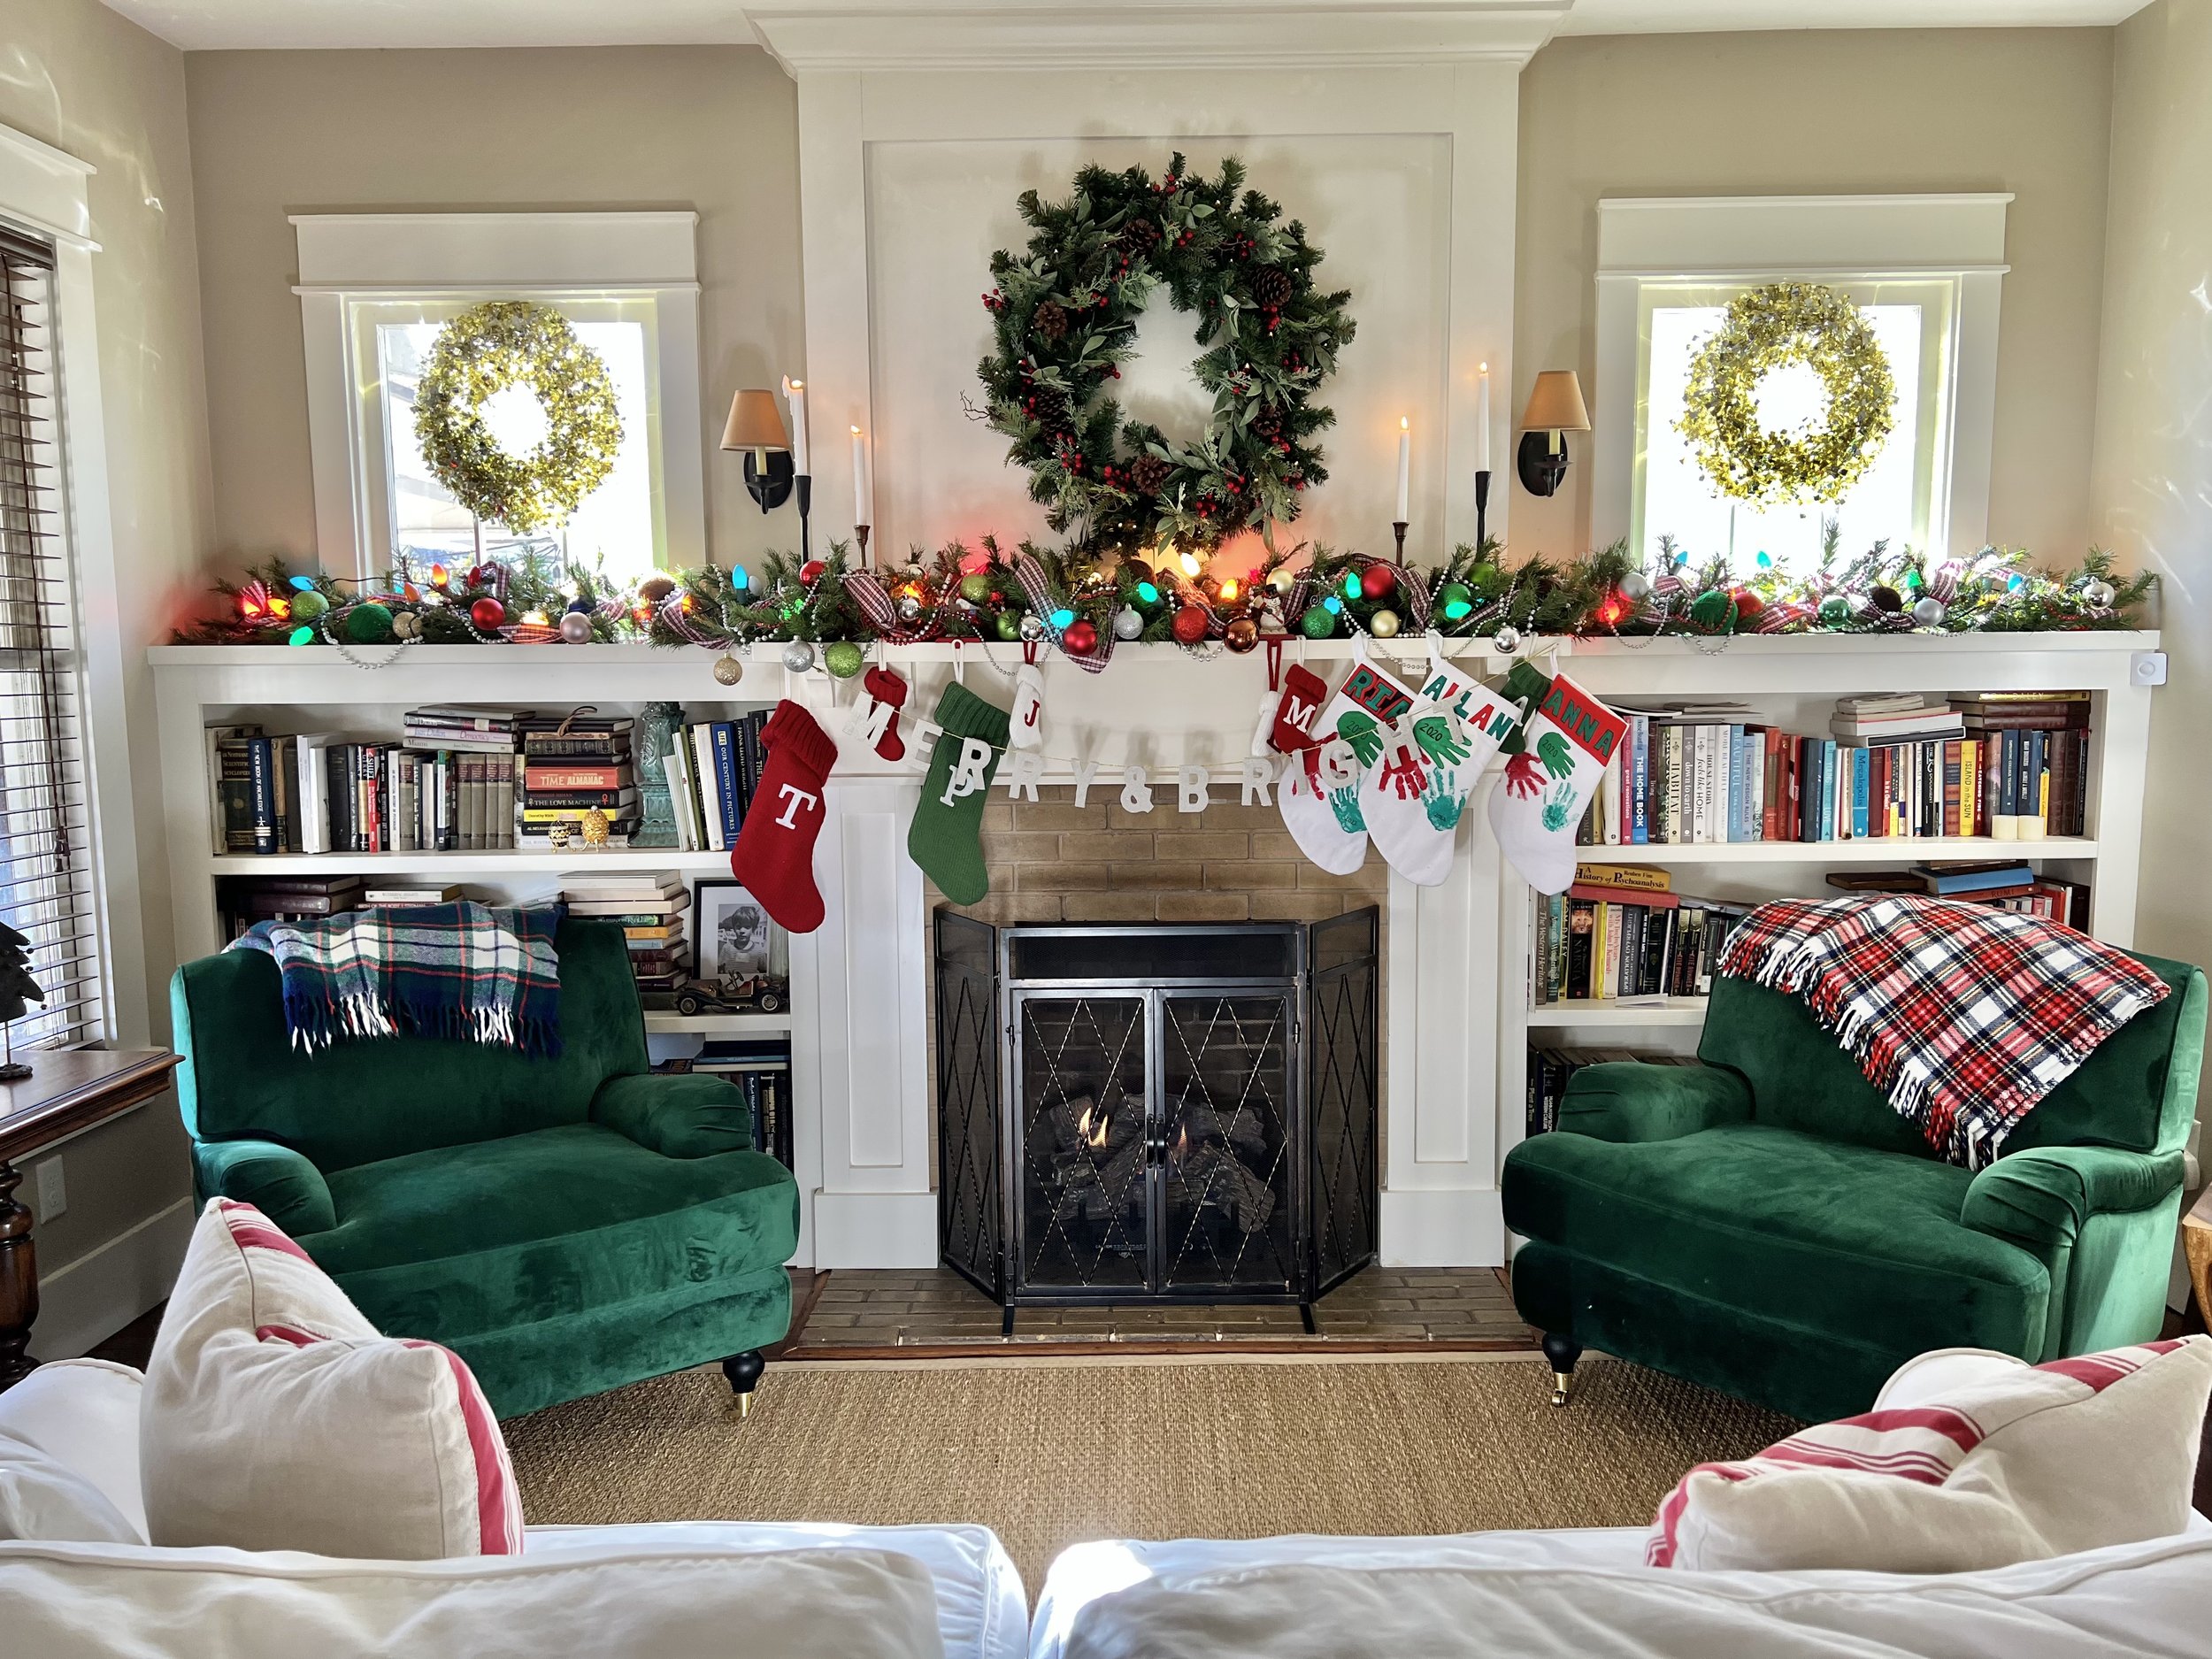 When Do You Take Your Christmas Decorations Down? — The Property ...